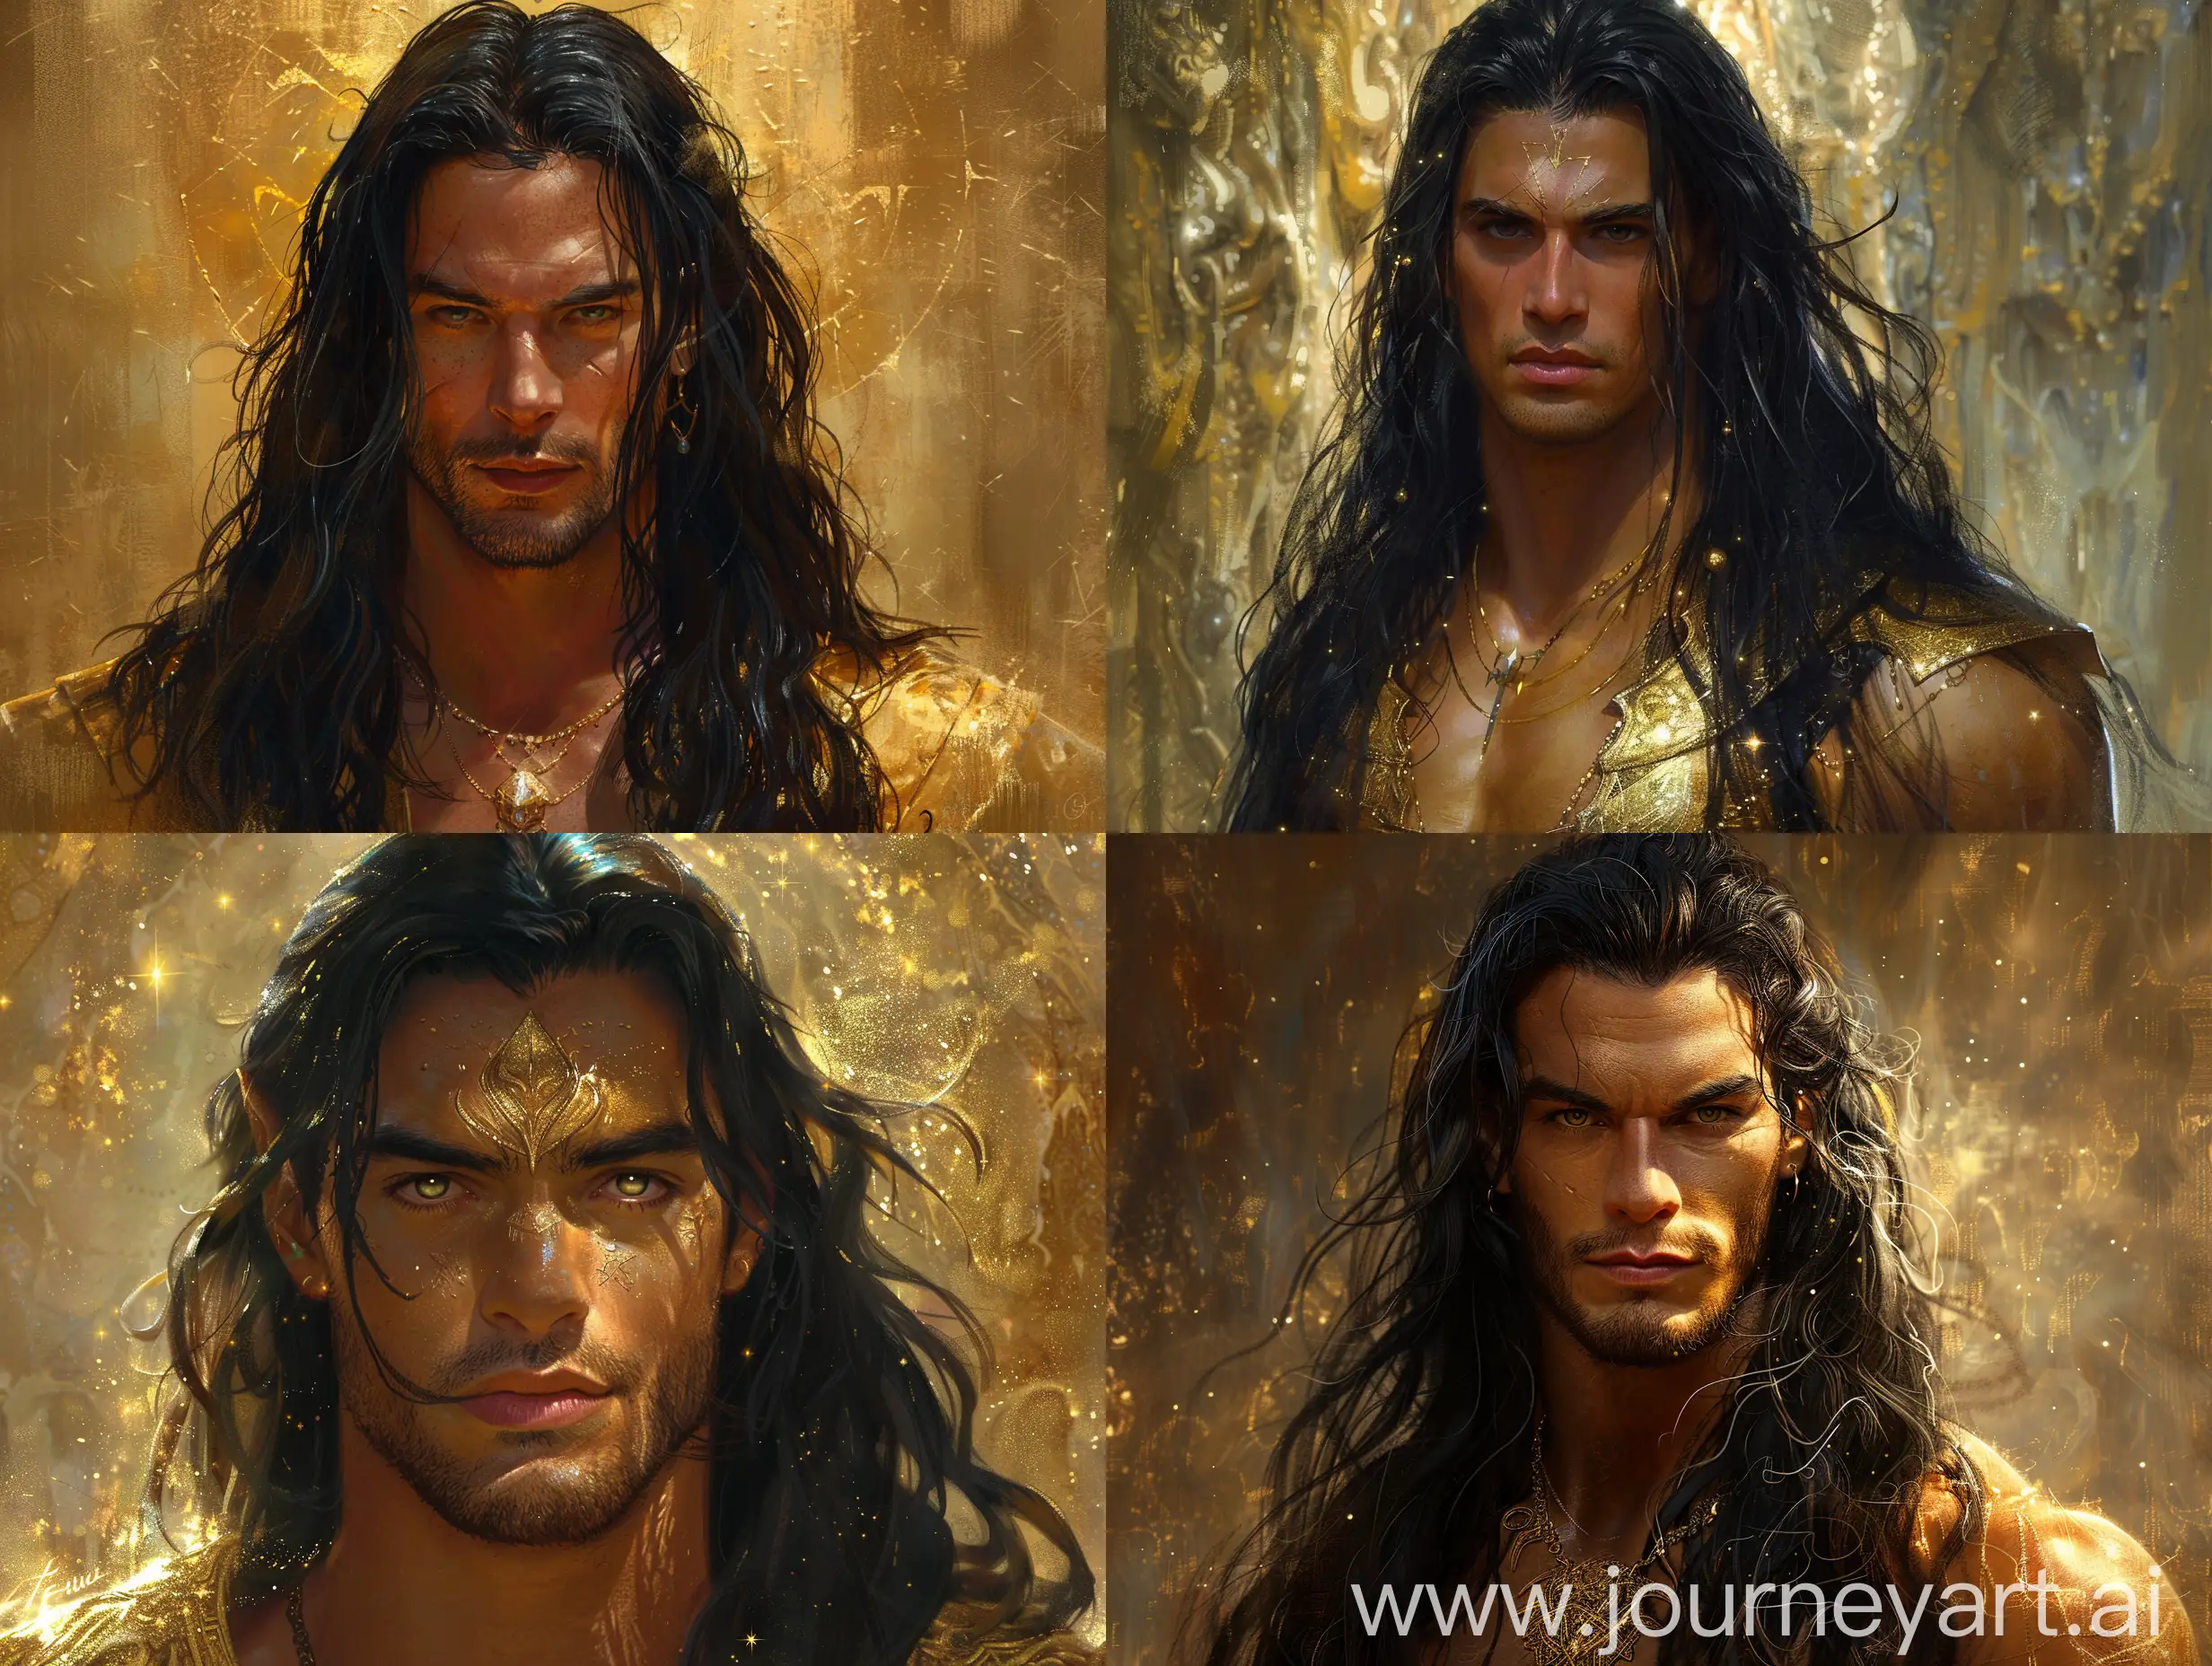 Subject: a king of gods of unnatural power and beauty as a figure beyond normal divinity; bronze tanned golden skin, long glossy black hair darker and more beautiful than the stars in the universe, eyes that shine with the power and weight of infinite multiversal timelines, beauty and facial structure and power that is too beyond mortal words, muscular and beautiful. 
 Setting: in a realm beyond words, a realm of gold snd beauty for the feet of gods alone.  
Style/coloring: extremely realistic painted realism, detailed digital painting concept art, detailed paiting by gaston bussiere, craig mullins A mystical, dreamlike portrait in a cinematic style, Ed Emsh, Virgil Finlay, Norman Saunders, Hubert Rogers, Earle Bergey, Kelly Freas --upbeta --s 250